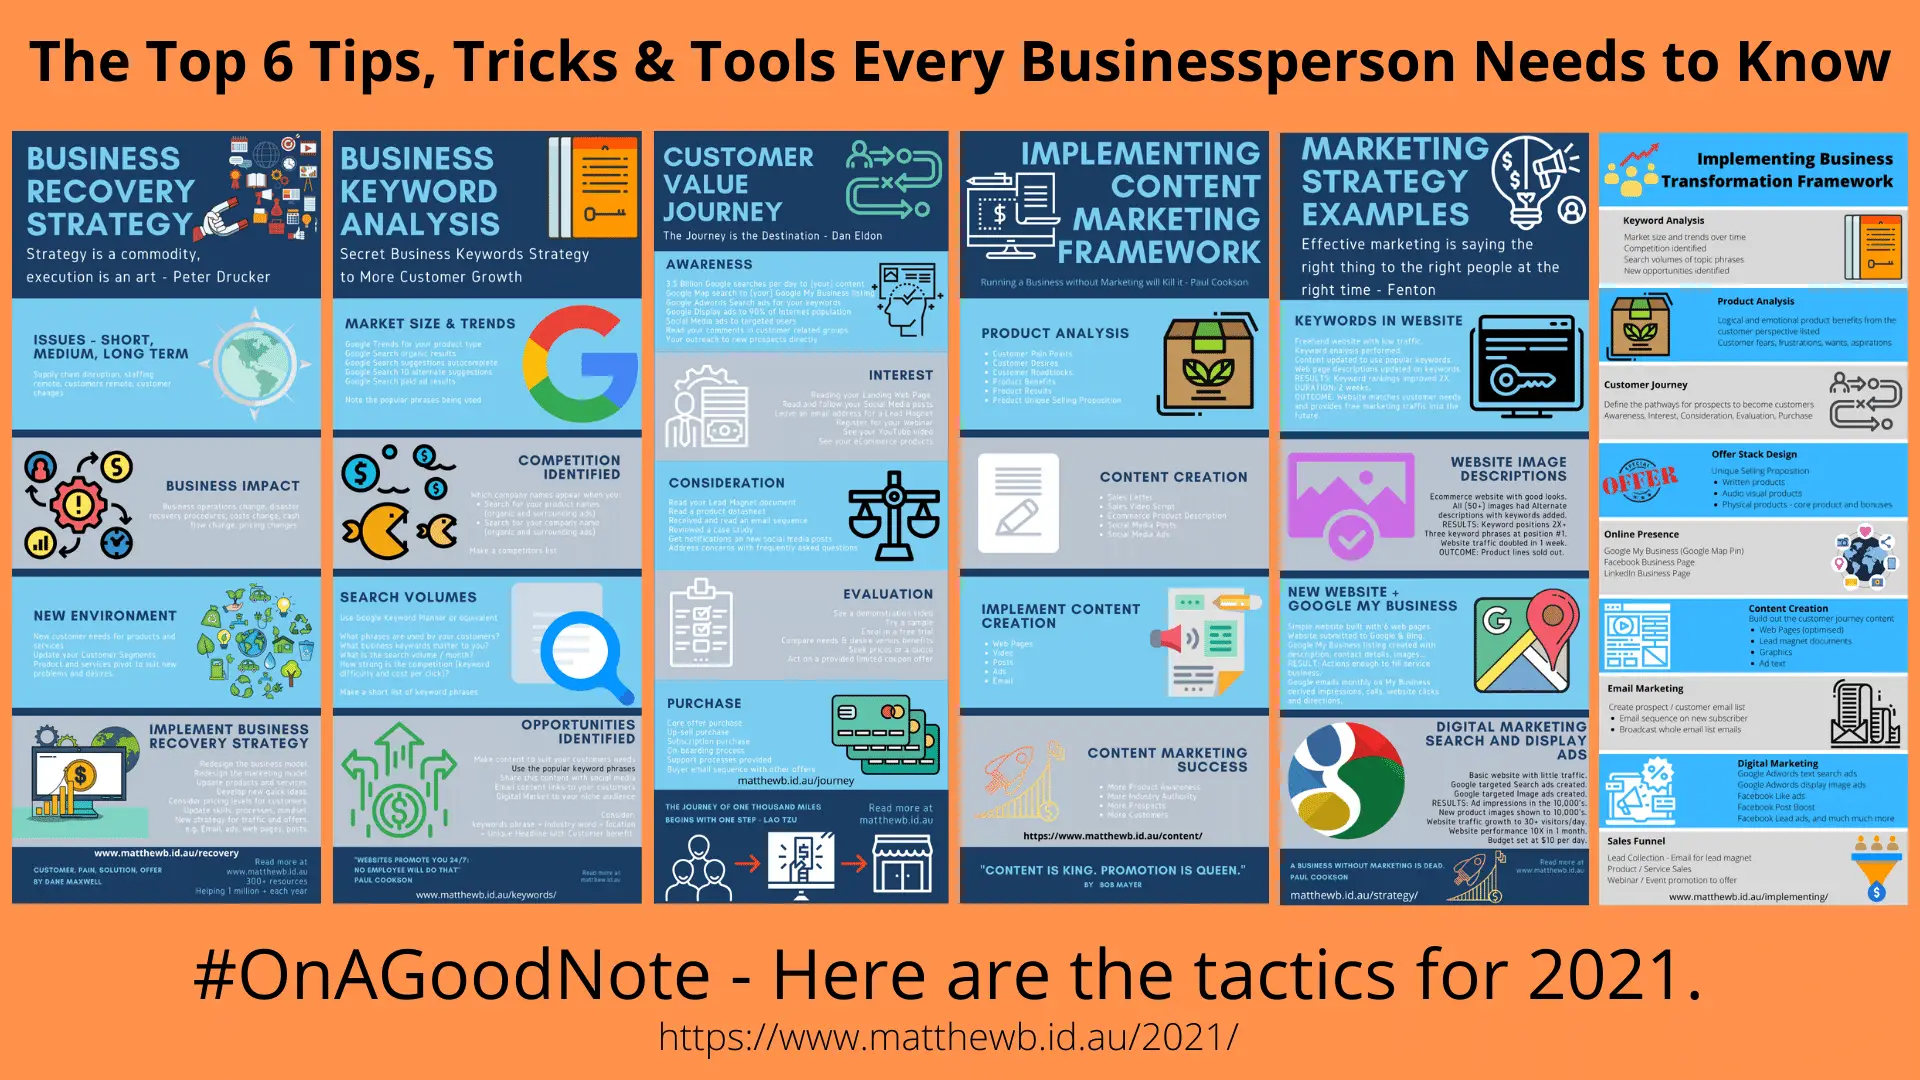 The top 6 tips, tricks and tools for every businessperson needs to know. Tactics for 2021.